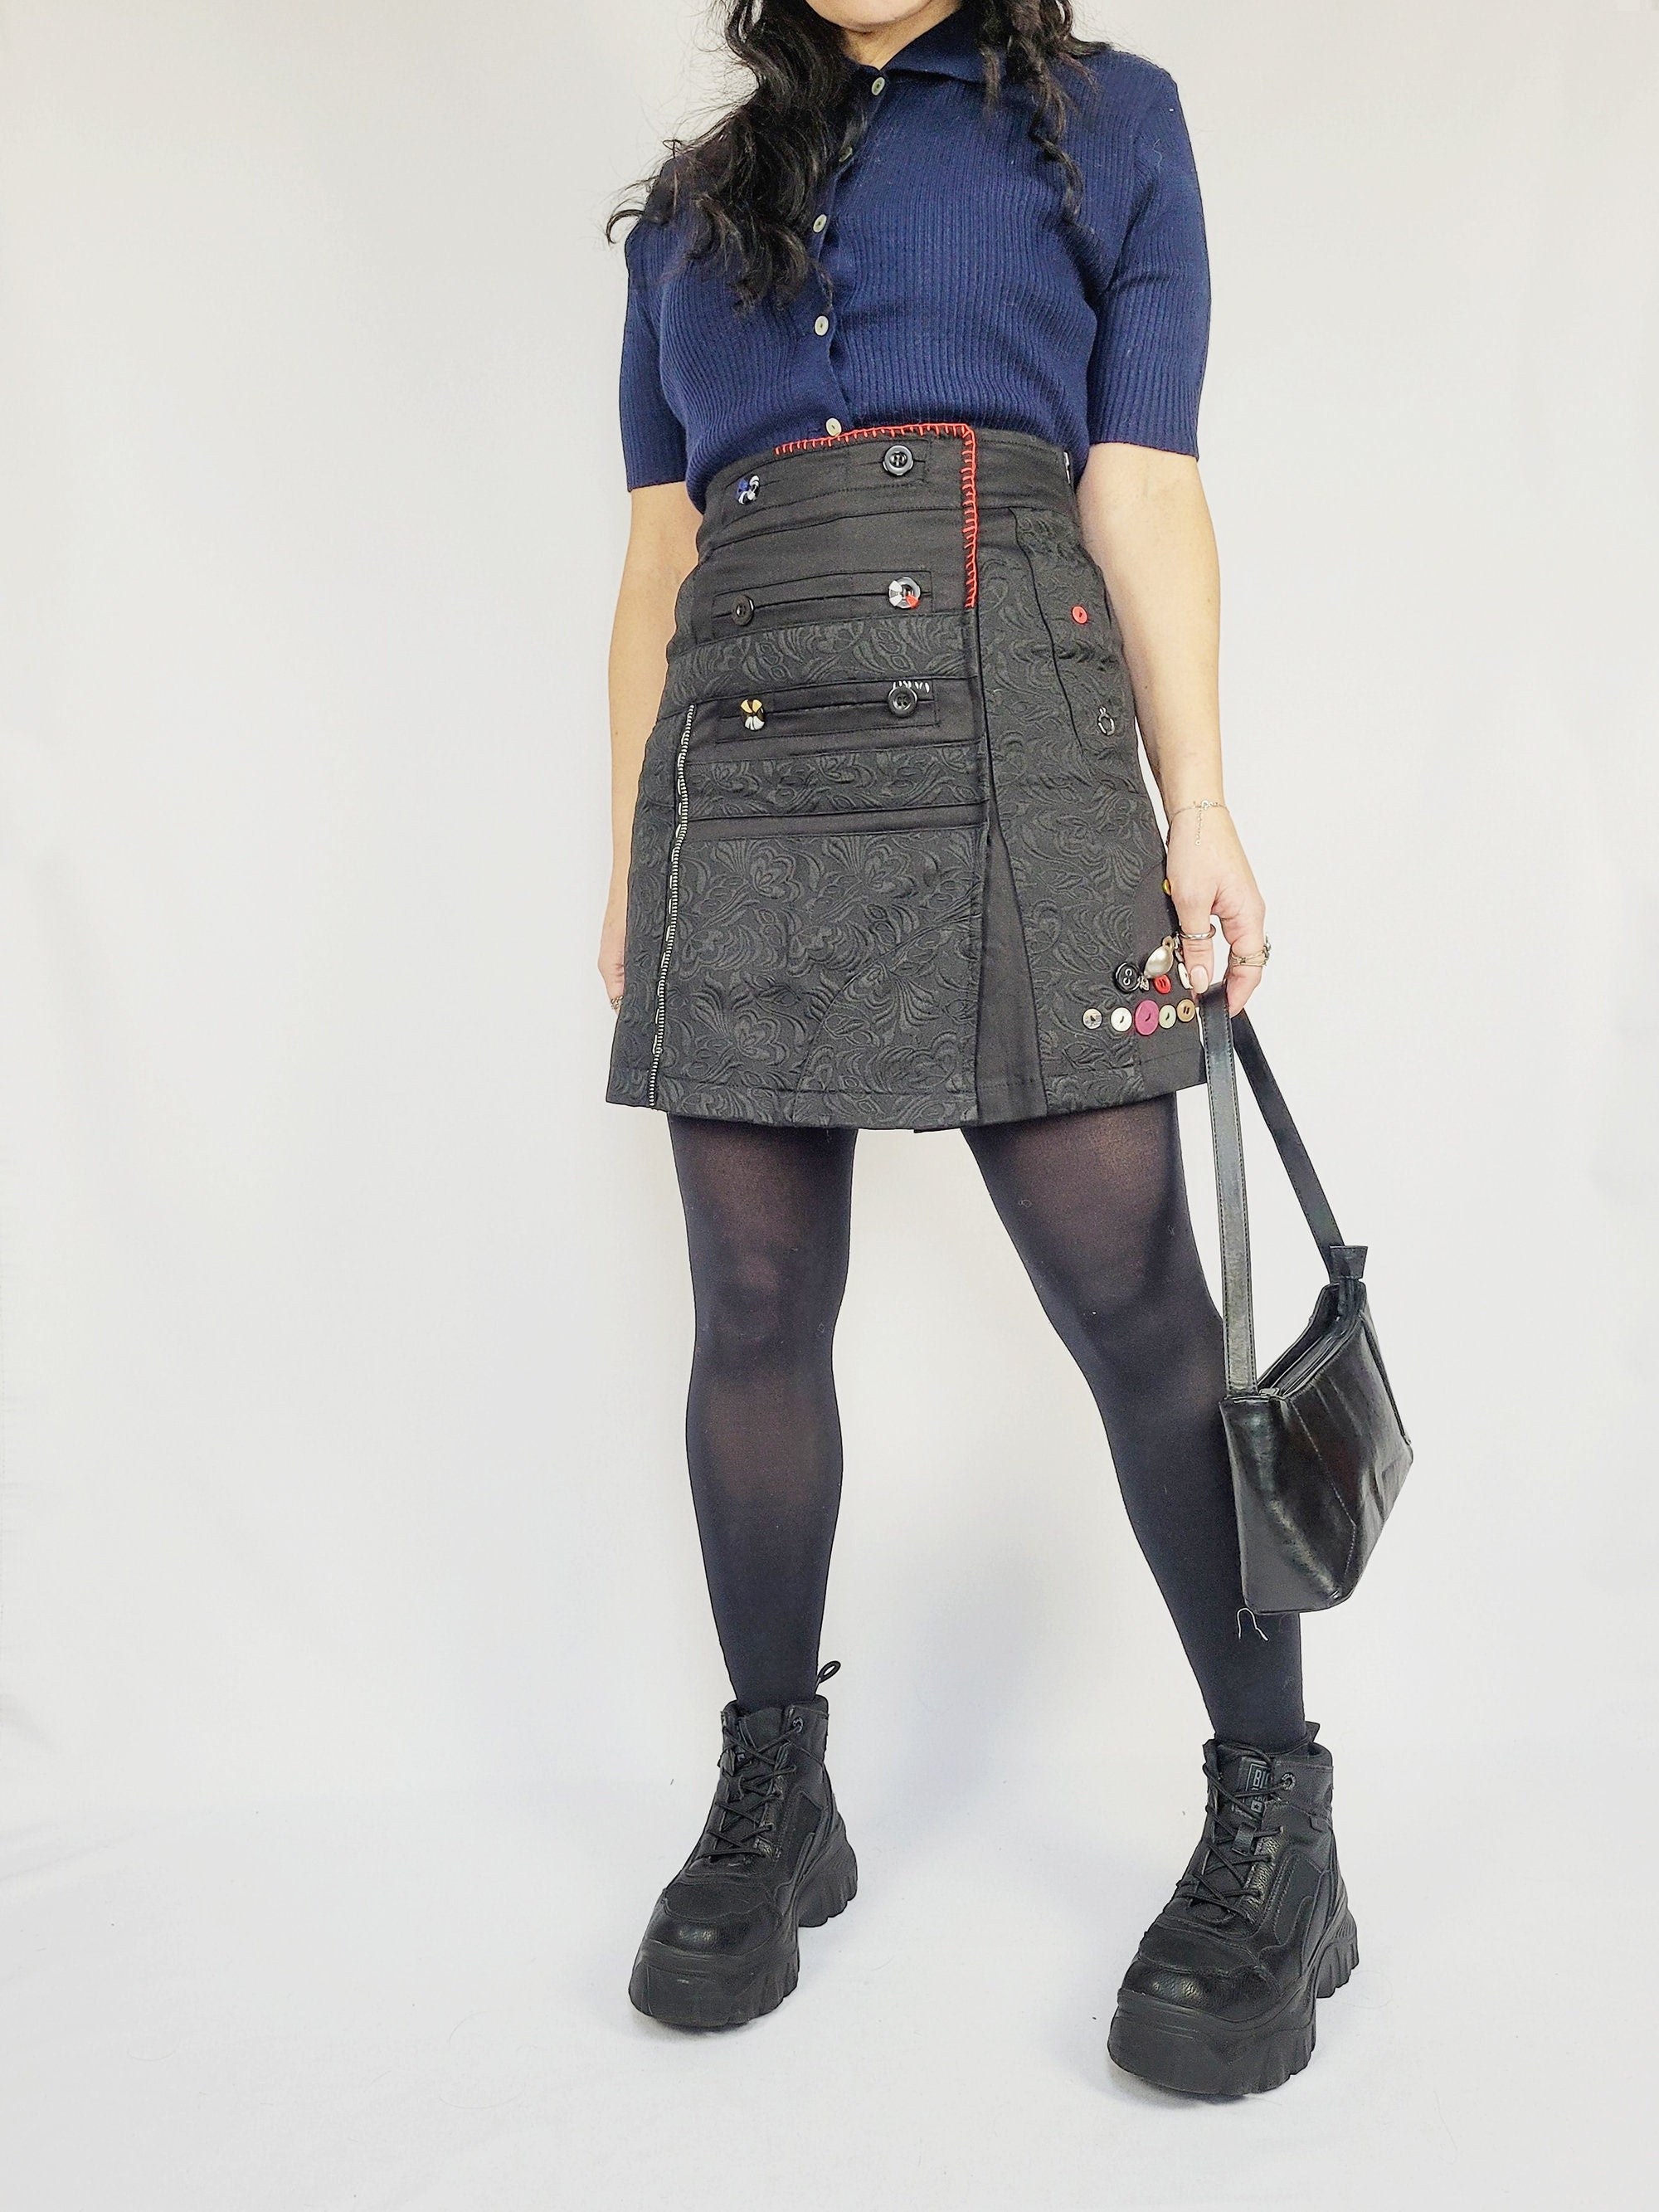 90s vintage black buttons decorated A line mini skirt